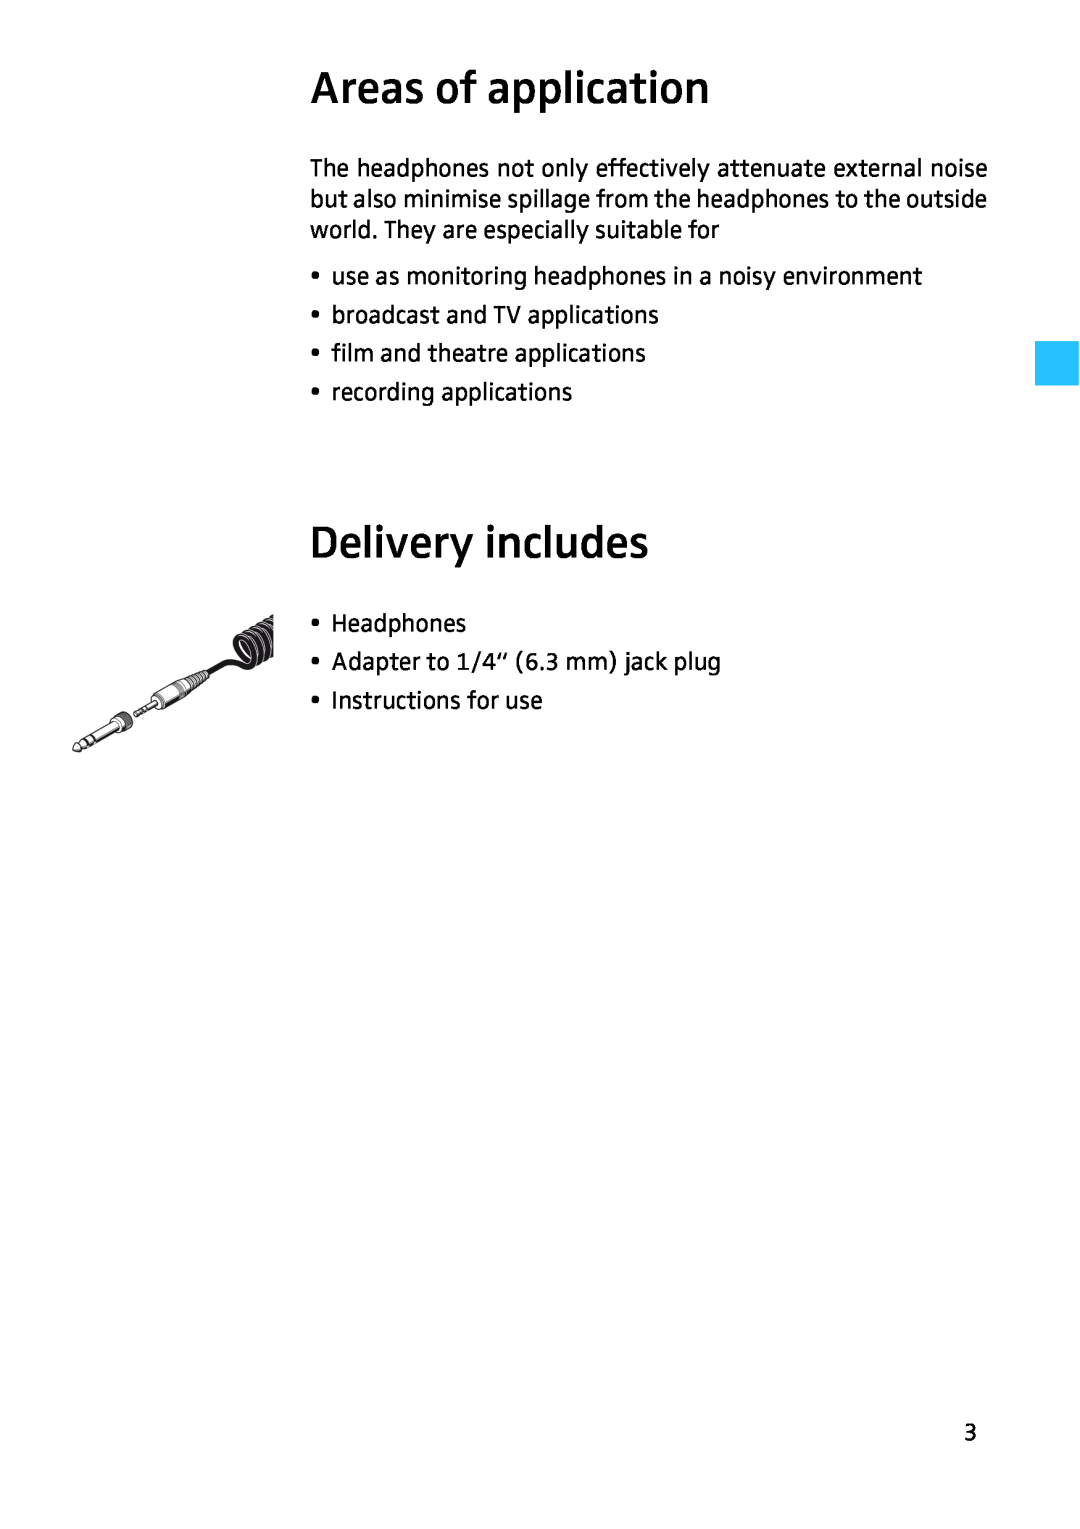 Sennheiser HD 280, 4974 instruction manual Areas of application, Delivery includes 